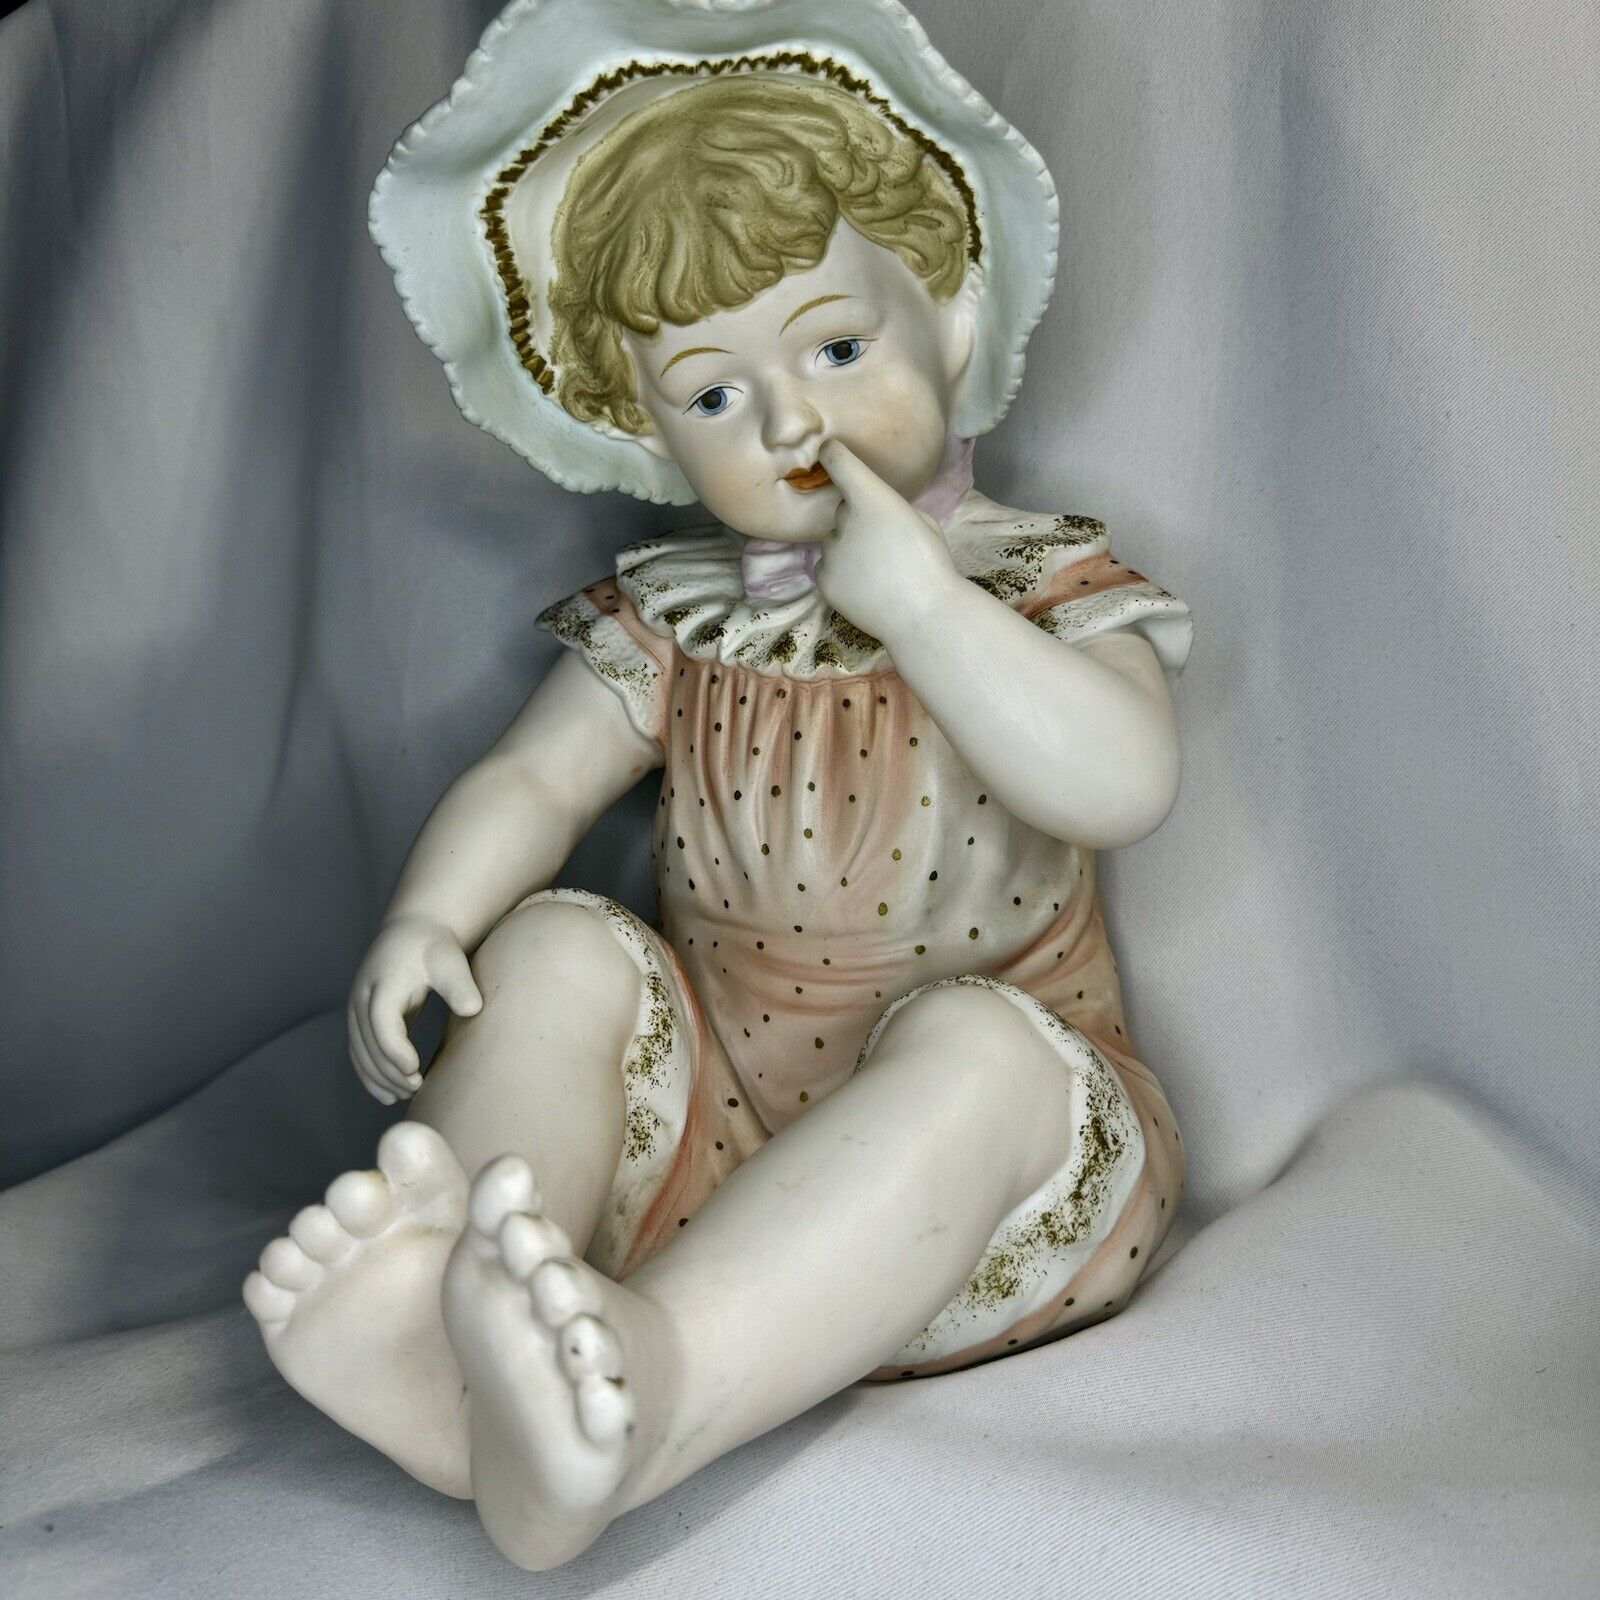 Vintage 12in Piano Baby Figurine Hand Painted Andrea Sadek Bisque 1919